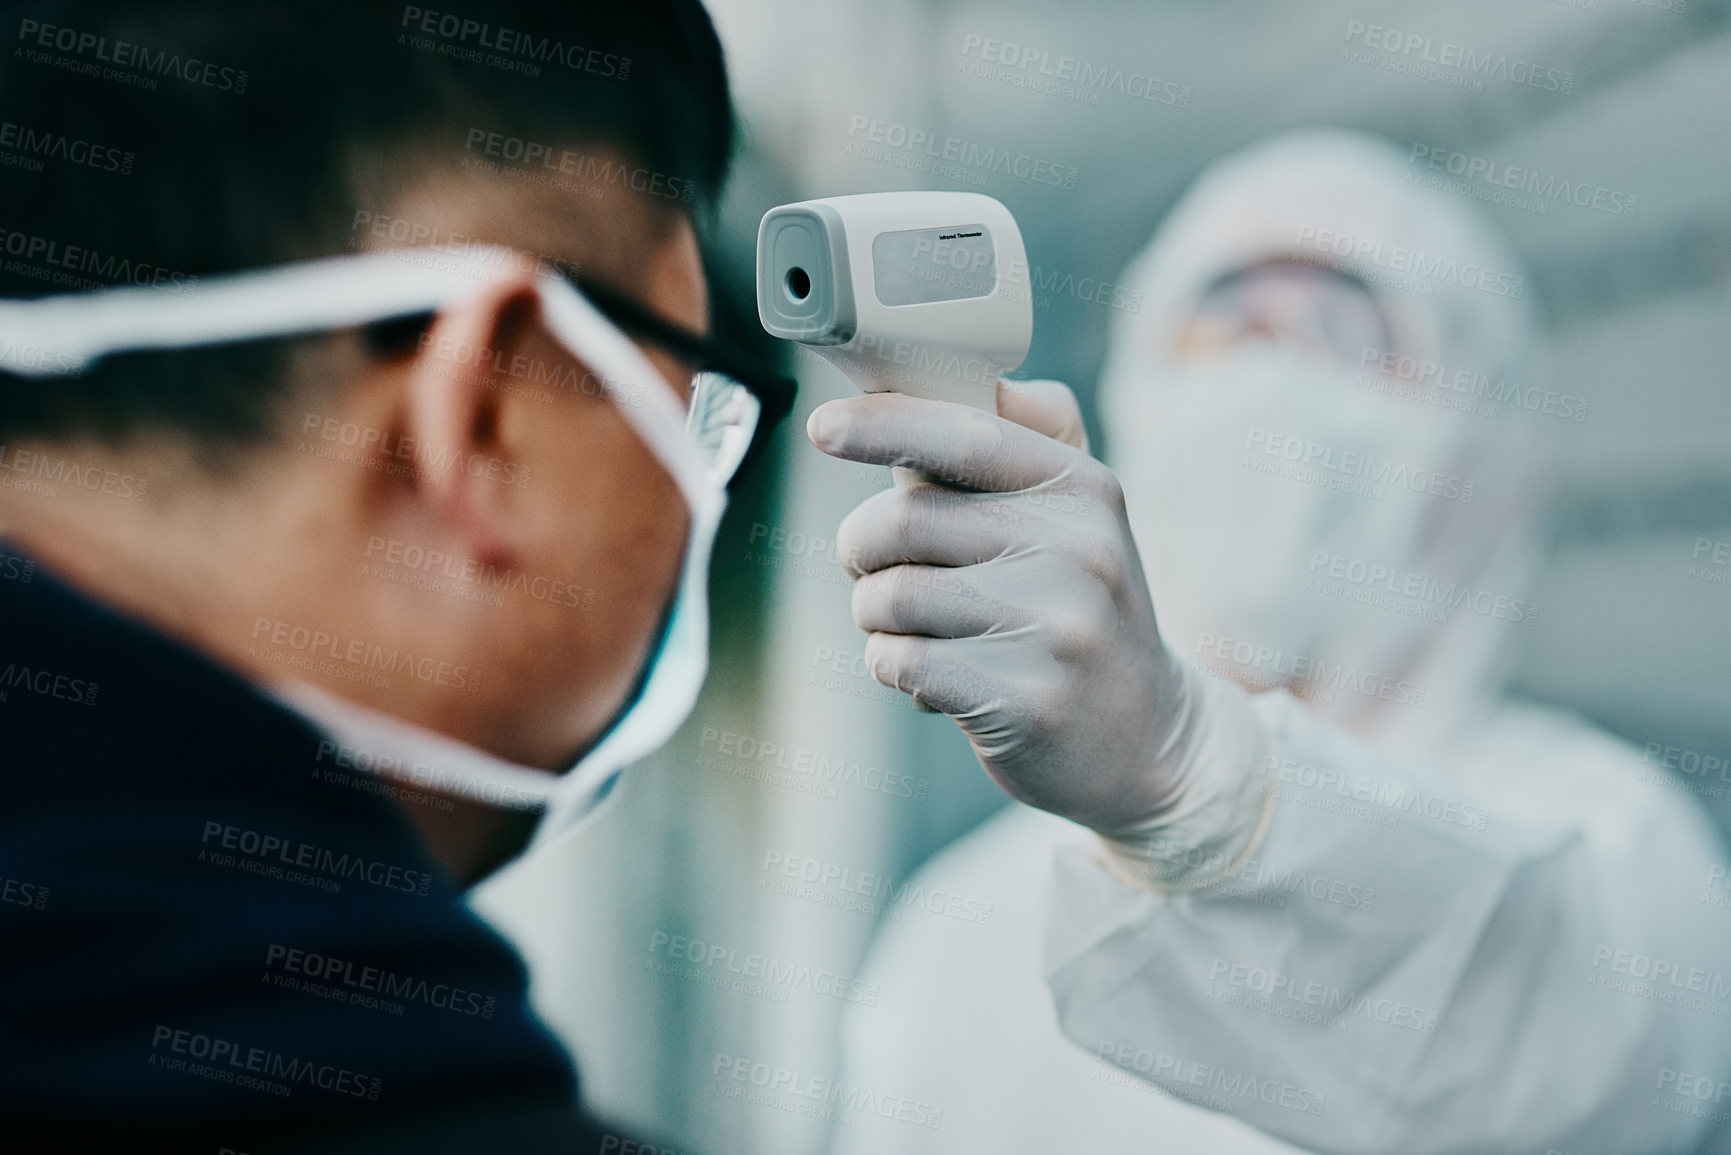 Buy stock photo Travel, healthcare and covid temperature testing outside with an infrared thermometer. Medical professional doing a coronavirus check on a man at airport entrance to prevent the spread of the virus
